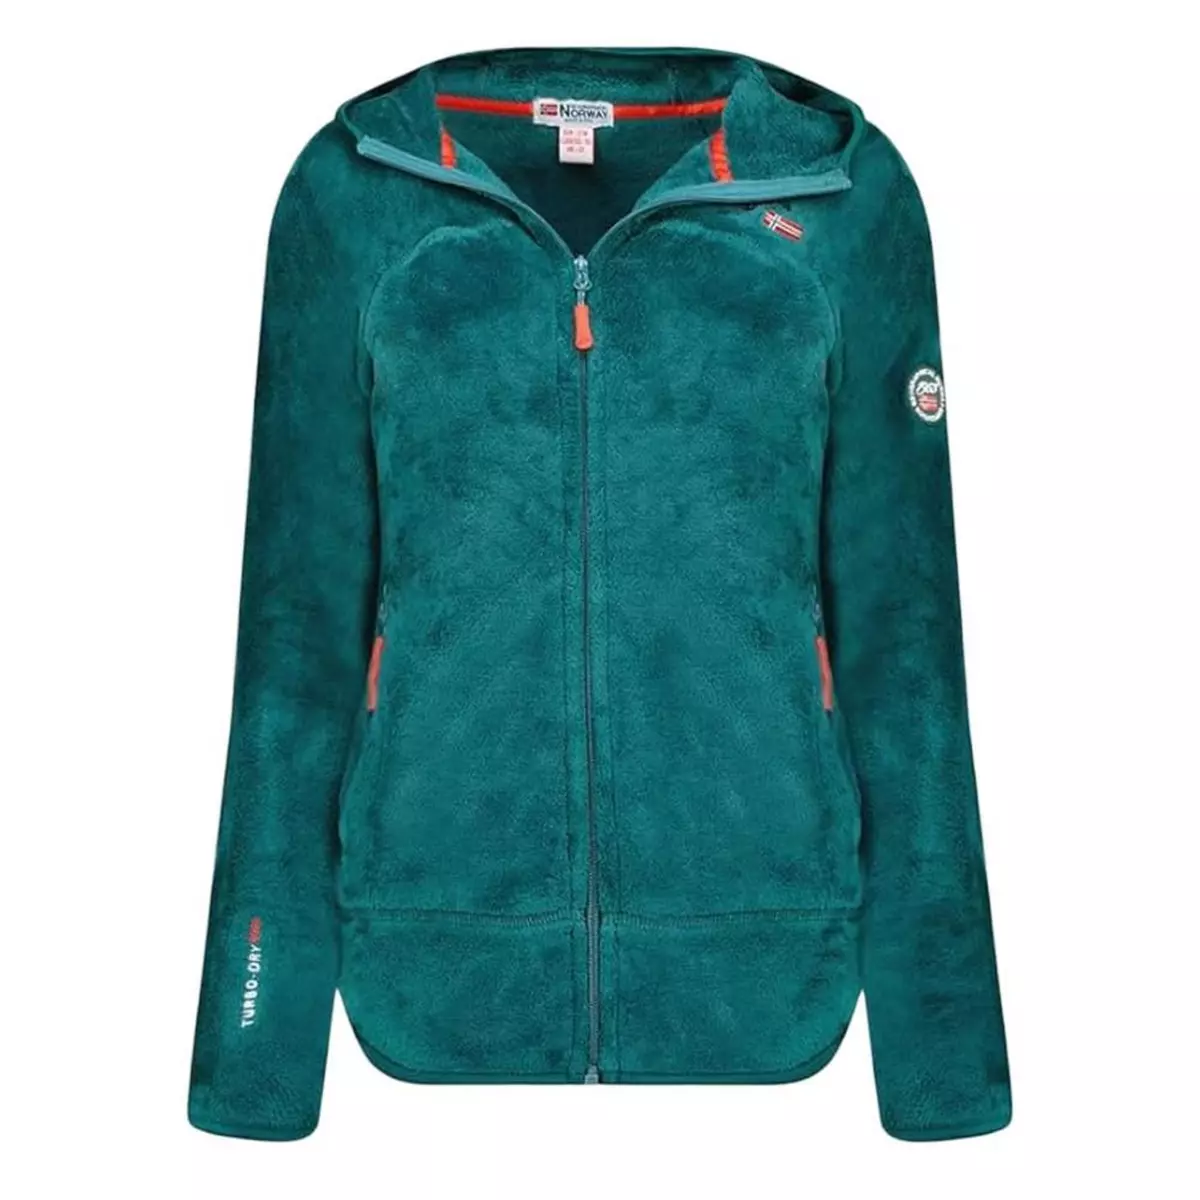 GEOGRAPHICAL NORWAY Veste Polaire Vert Femme Geographical Norway Upalood